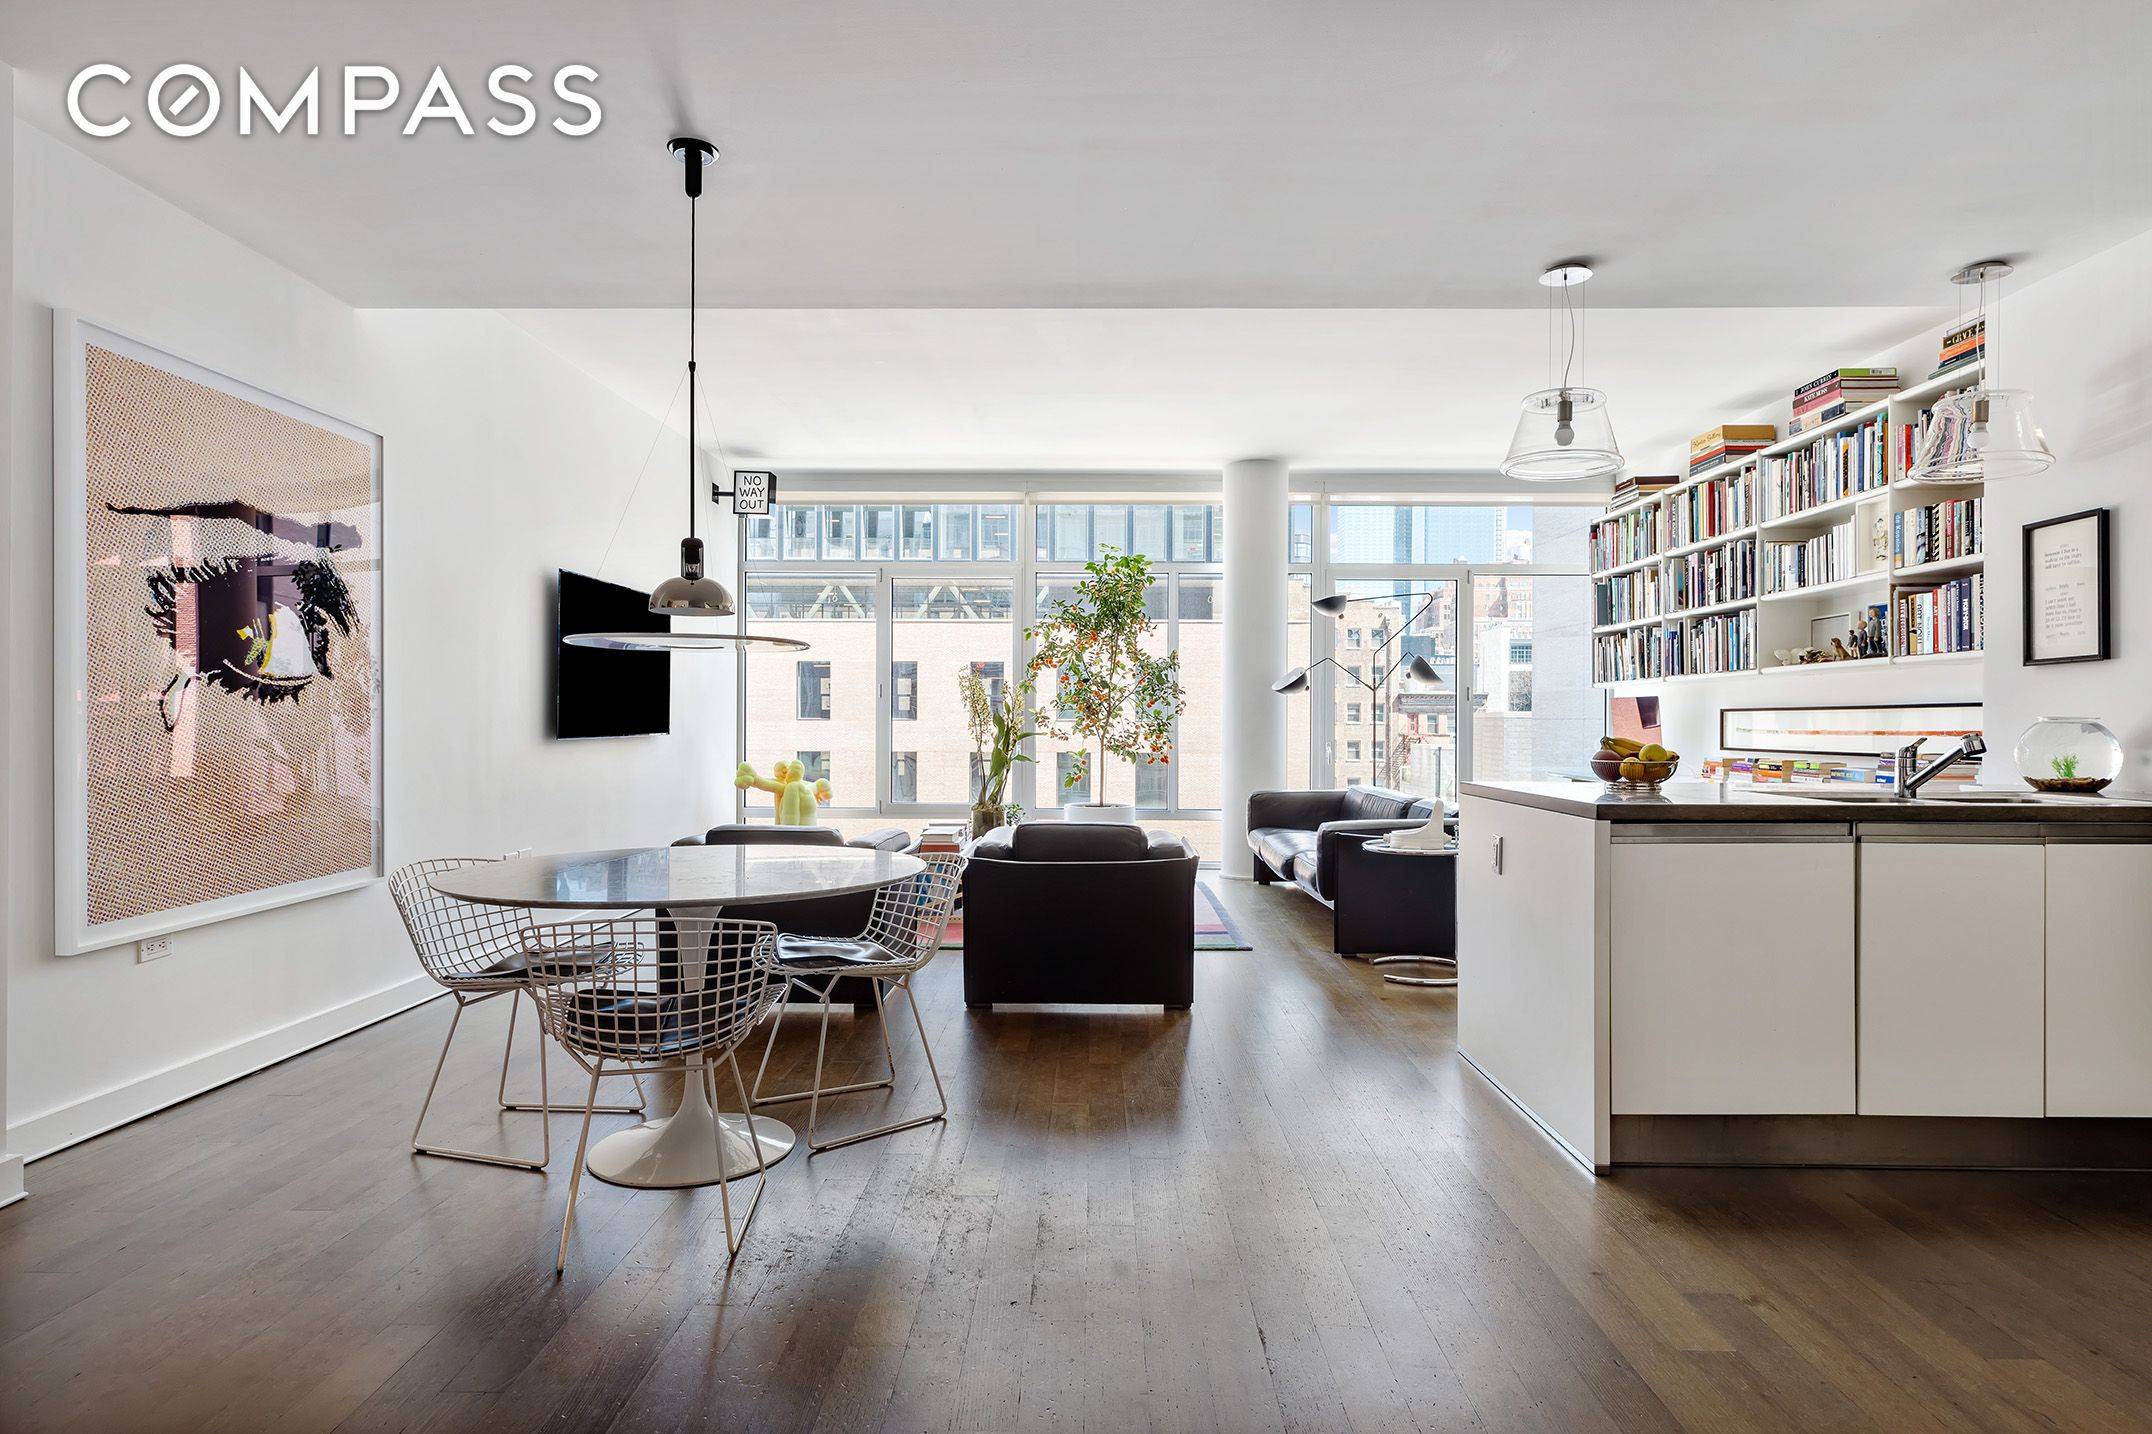 Classically modern and clean proportions radiate throughout this impeccable AD 100 architect Annabelle Selldorf designed West Chelsea 2 bedroom, 2.